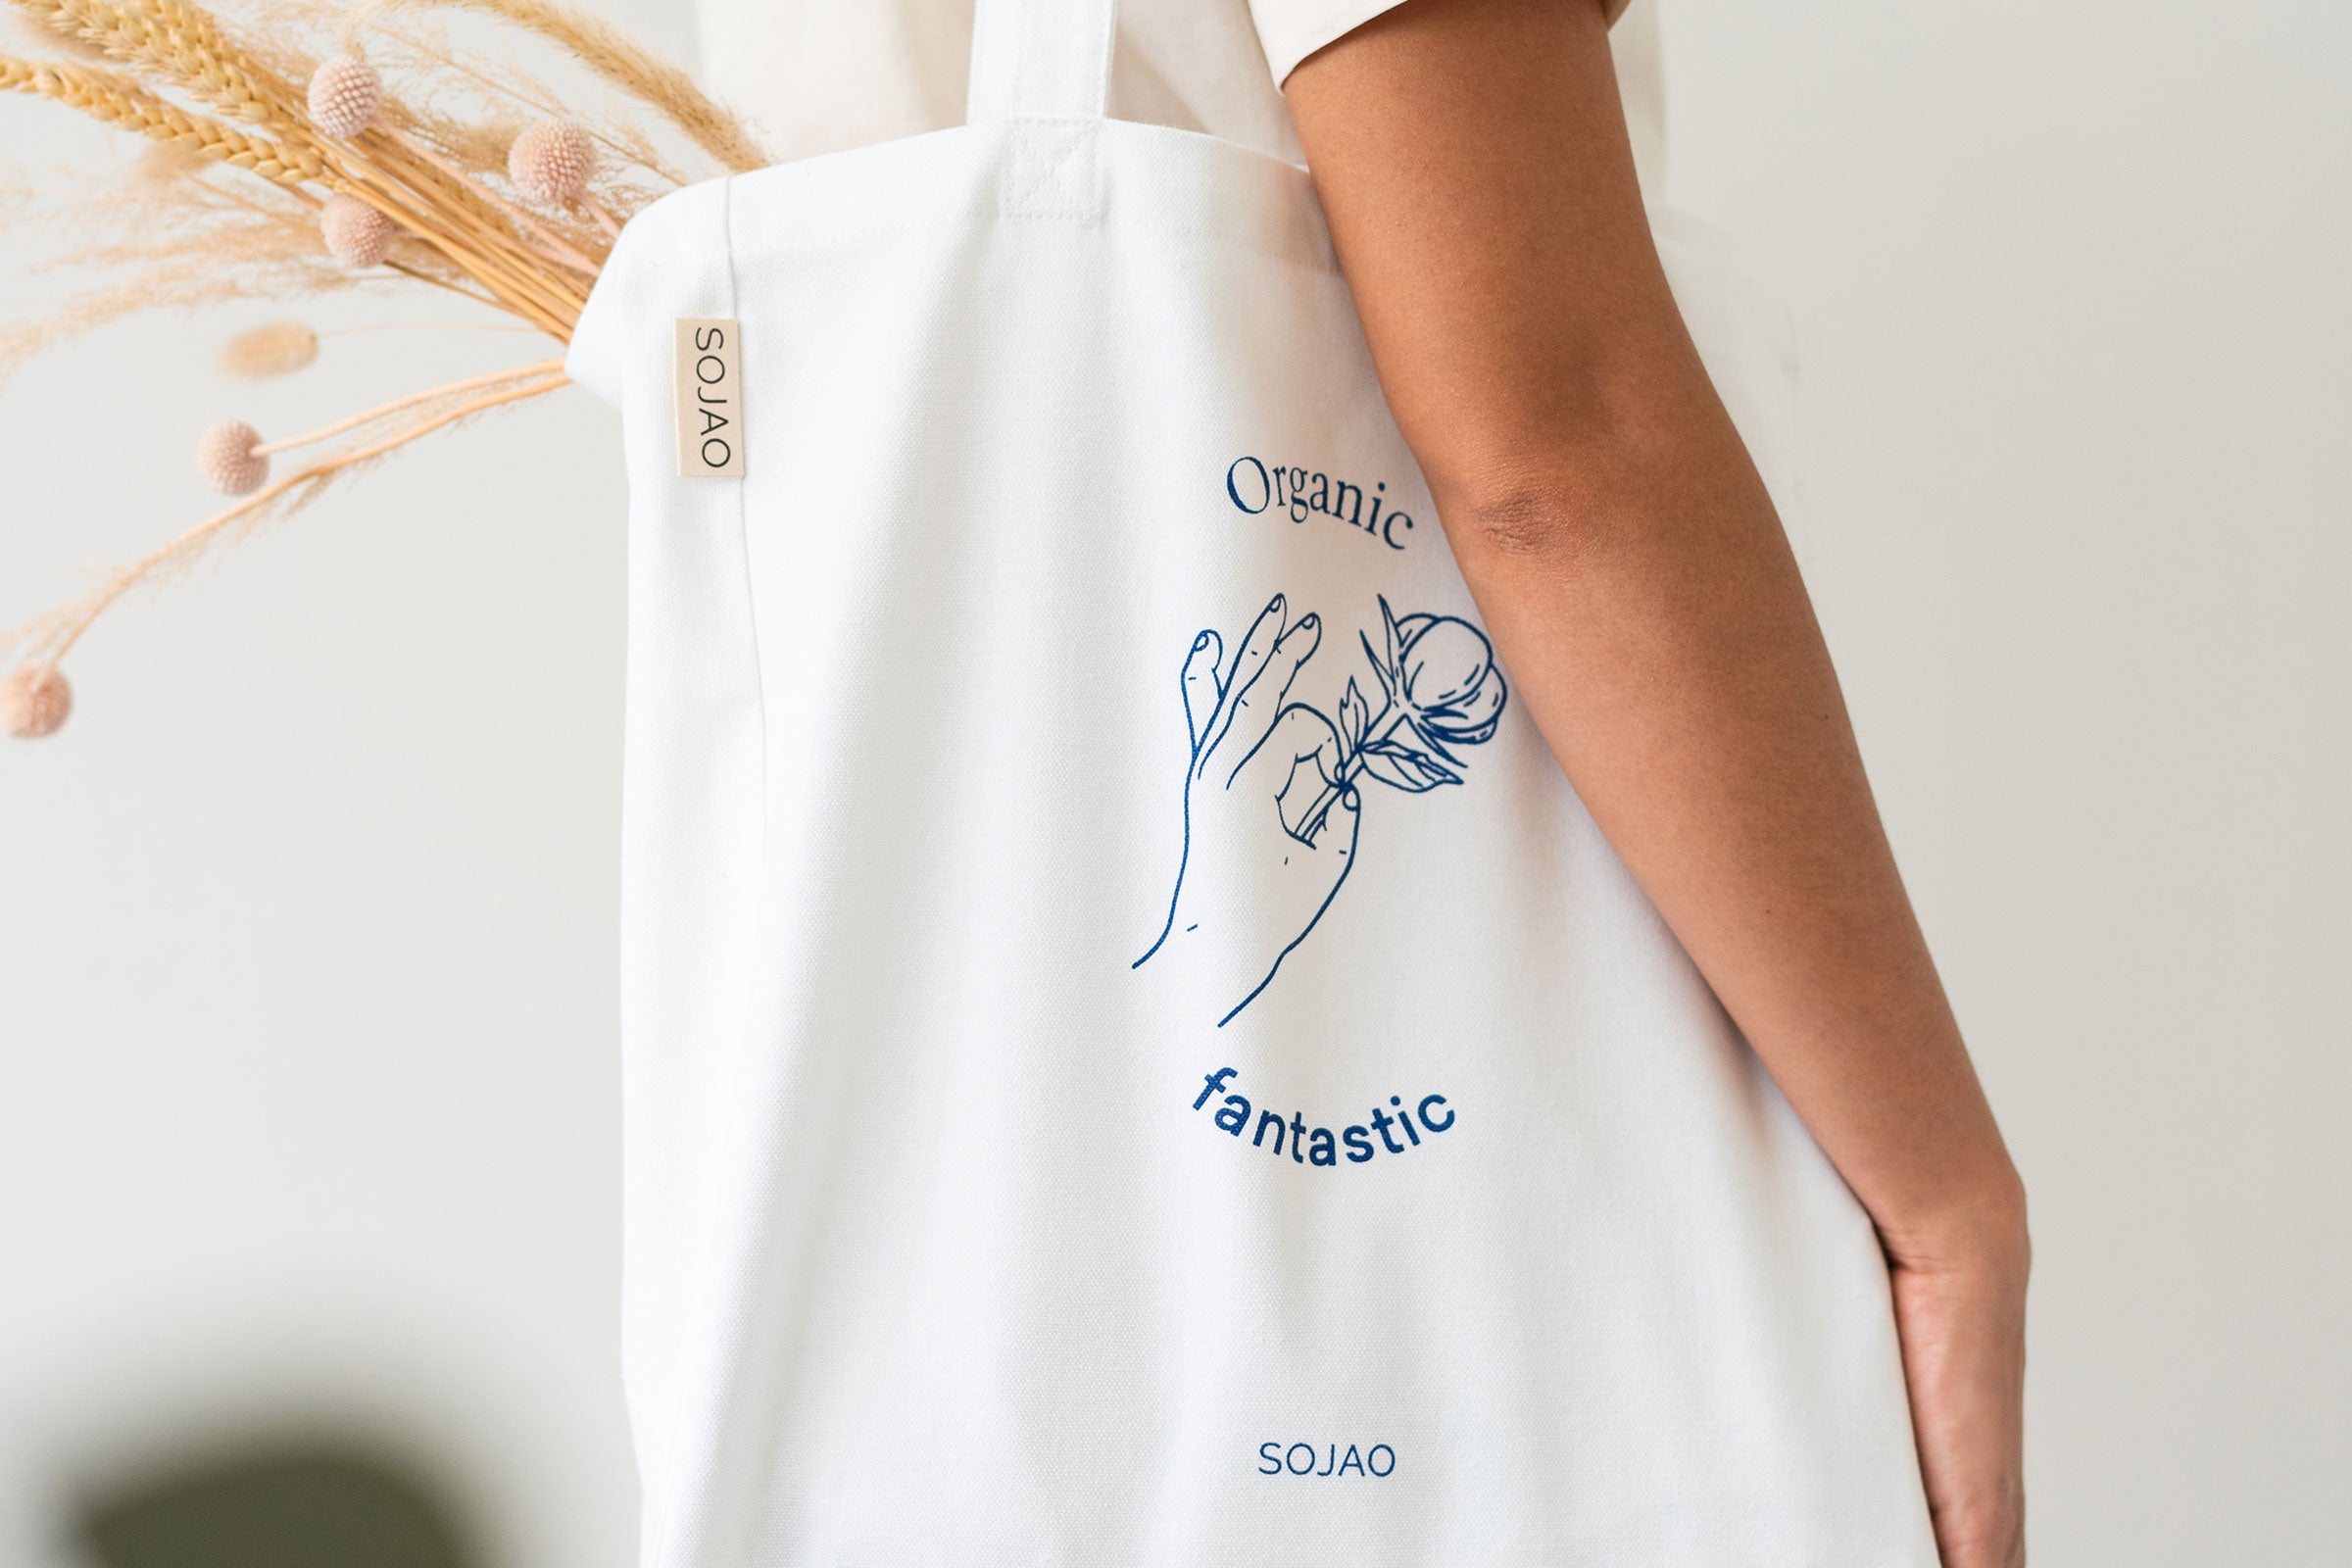 white-organic-cotton-tote-bag-mid-shot-by-sojao